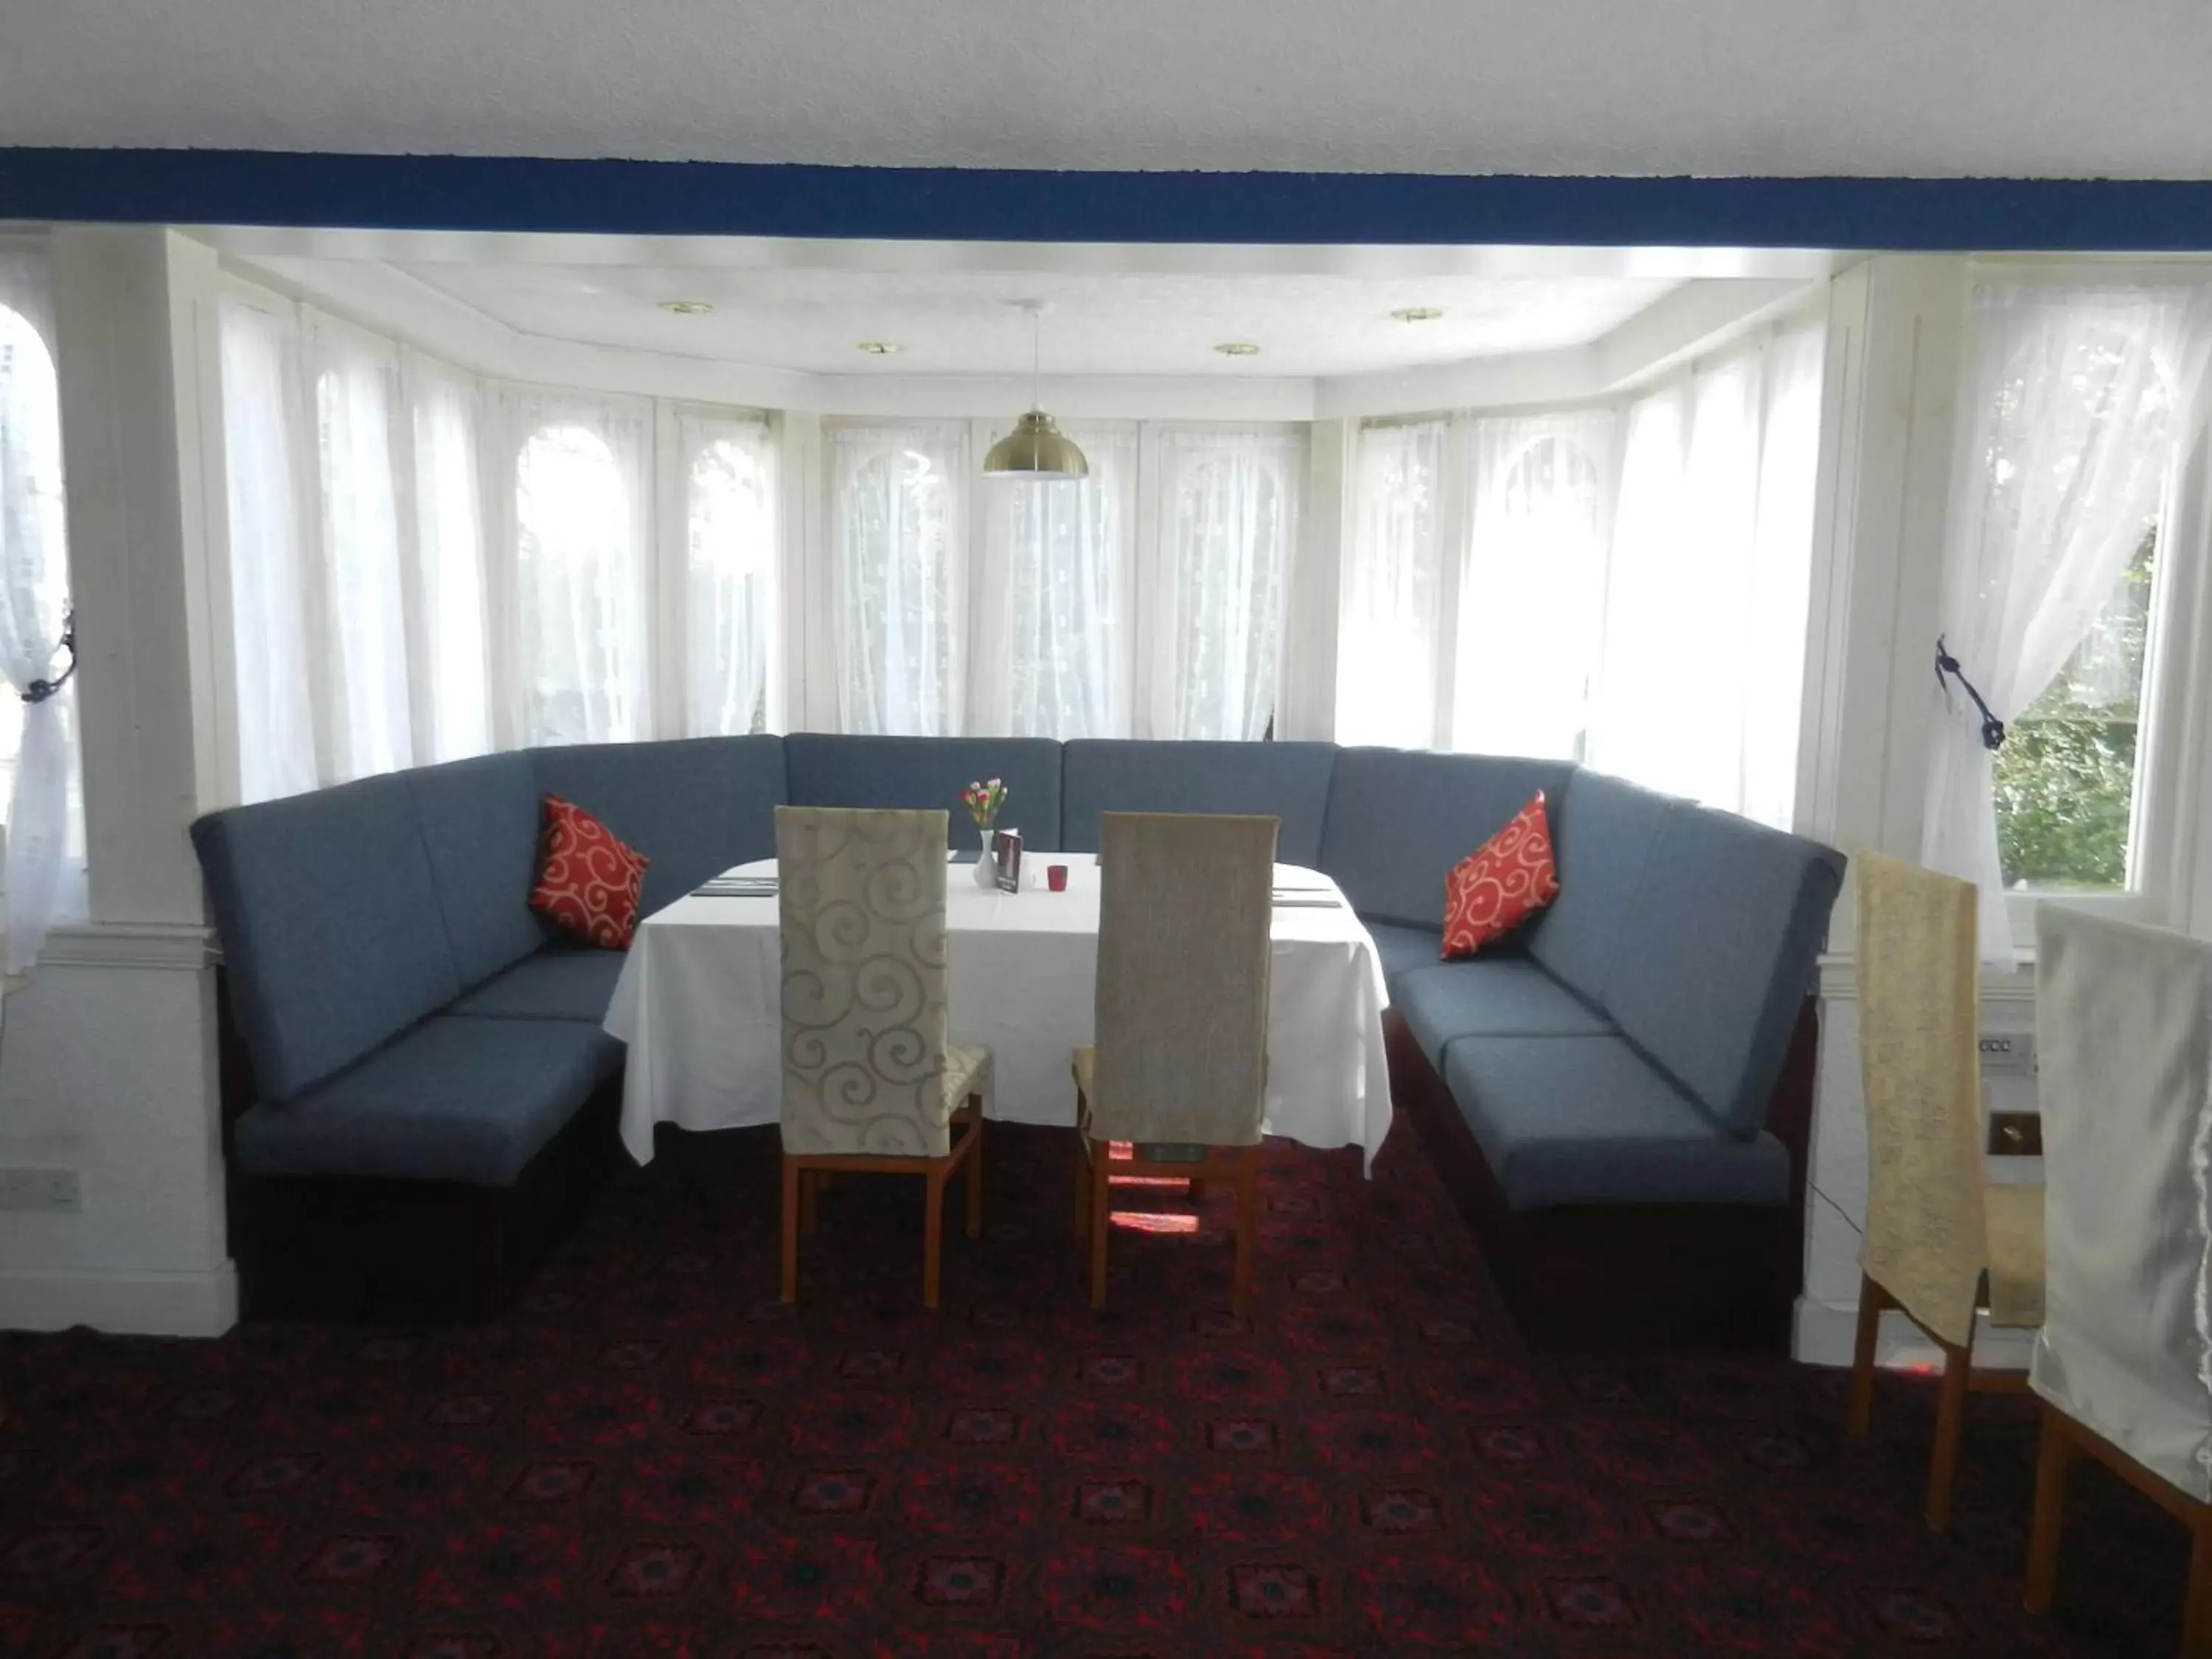 Restaurant/places to eat, Seating Area in Morangie Hotel Tain